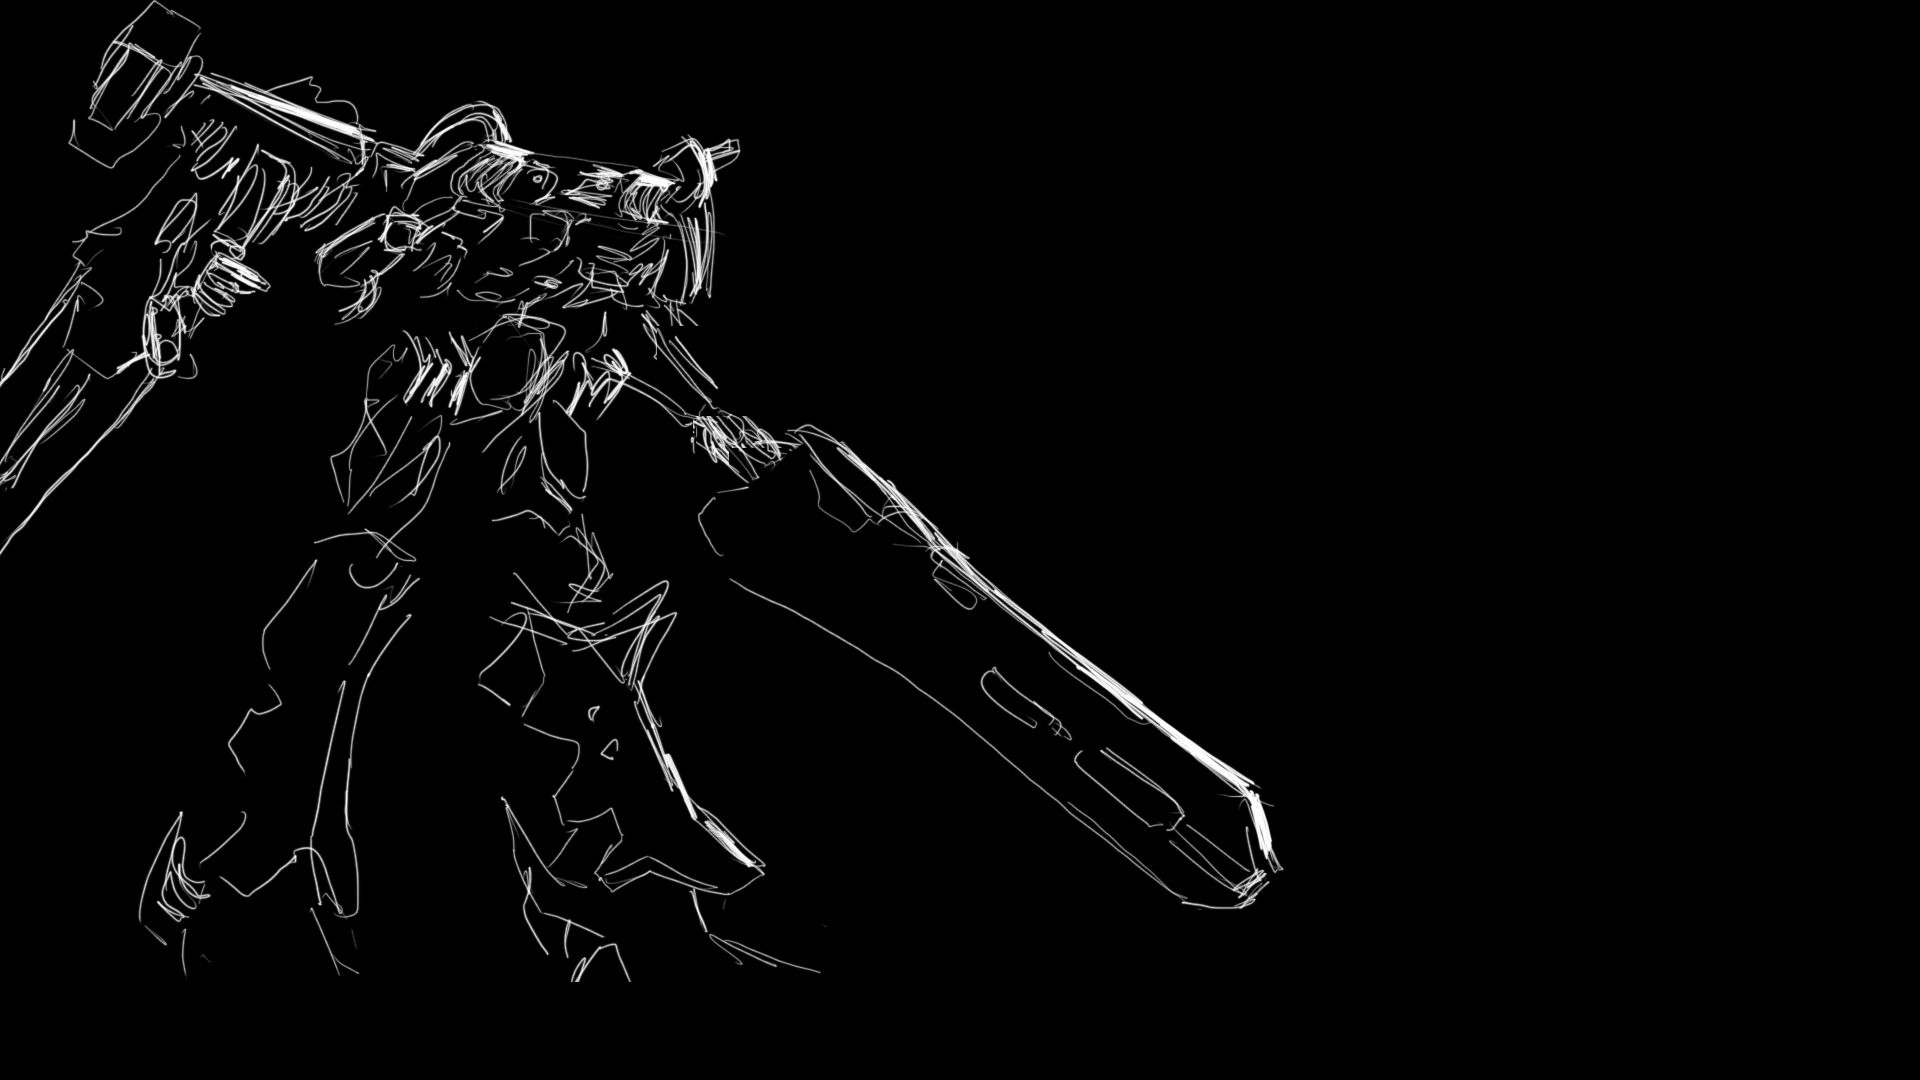 Video Game – Armored Core Wallpaper